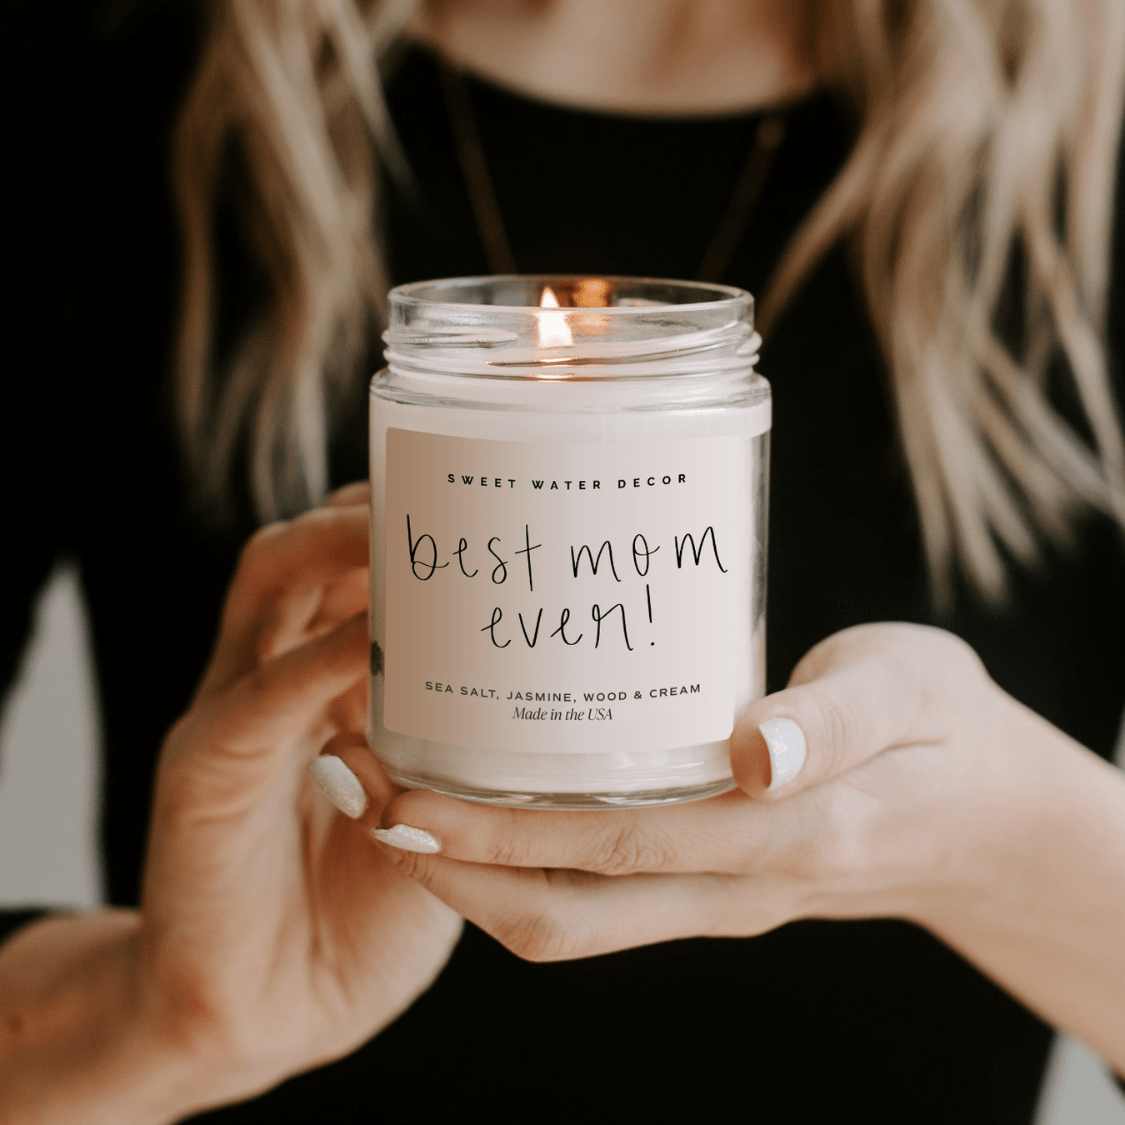 Best Mom Ever Candle By Sweet Water Decor - Unboxme